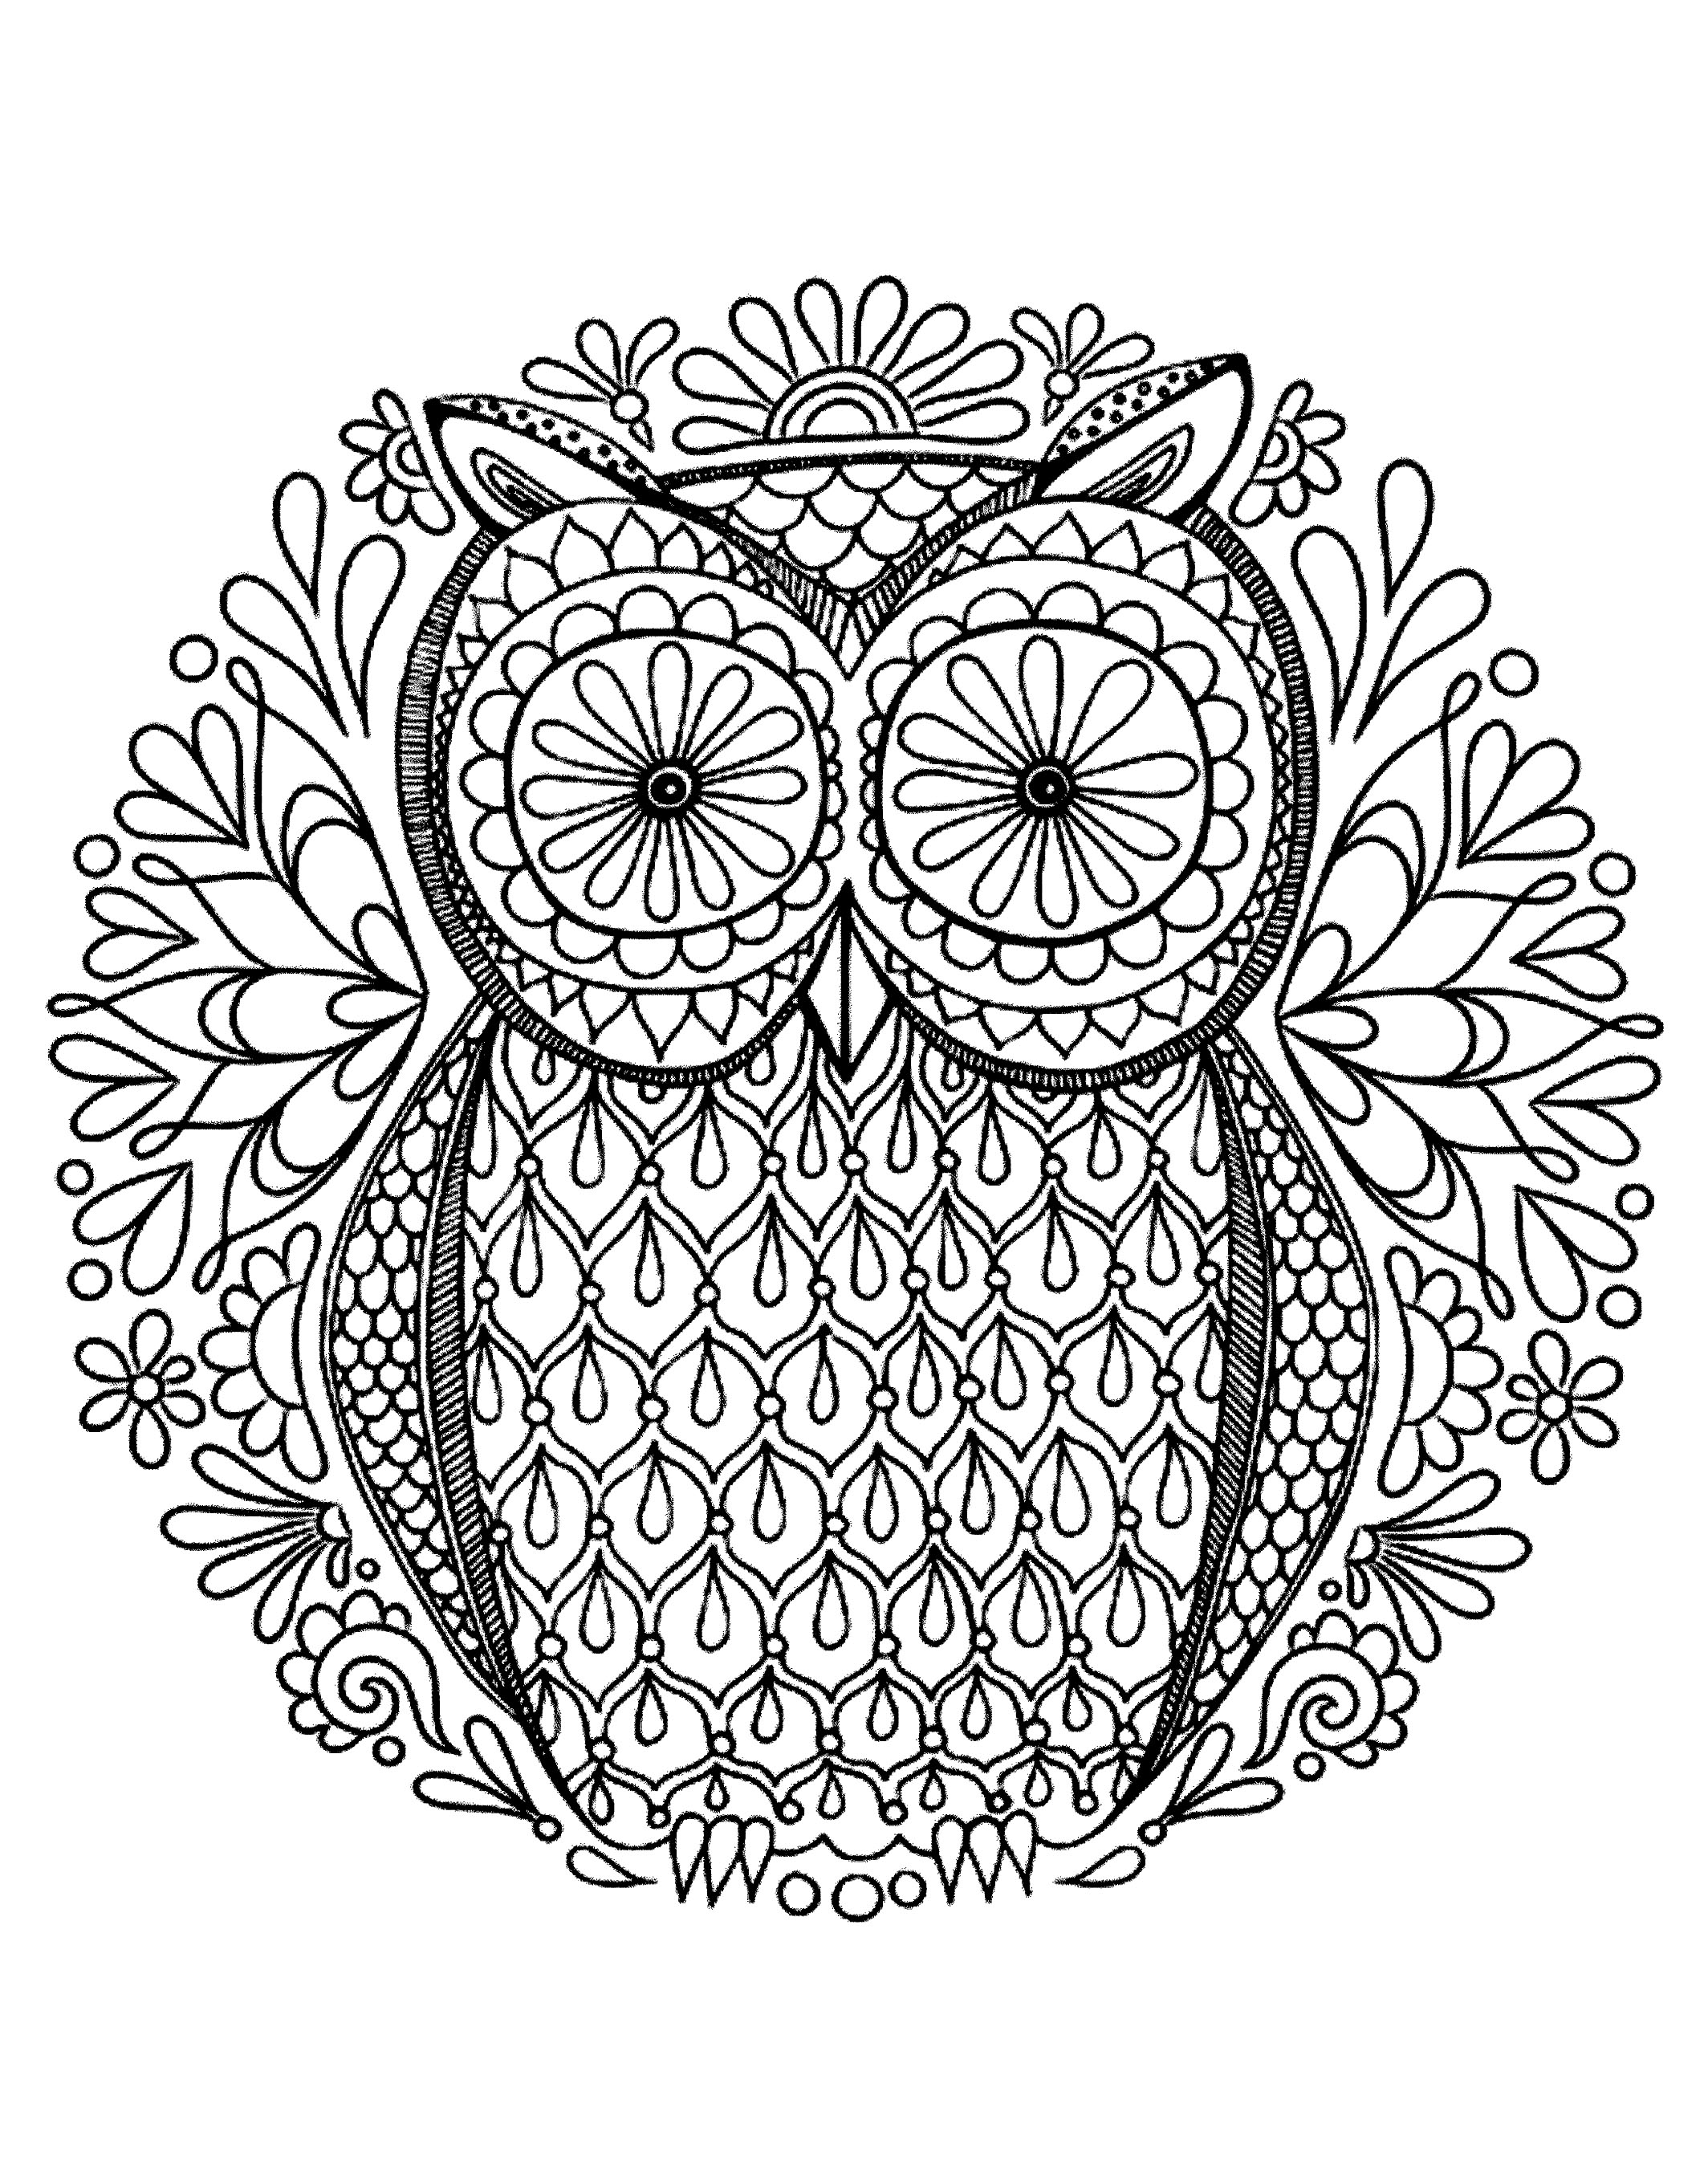 Simple Owl Coloring Pages For Adults - Owl coloring pages are fun for ...